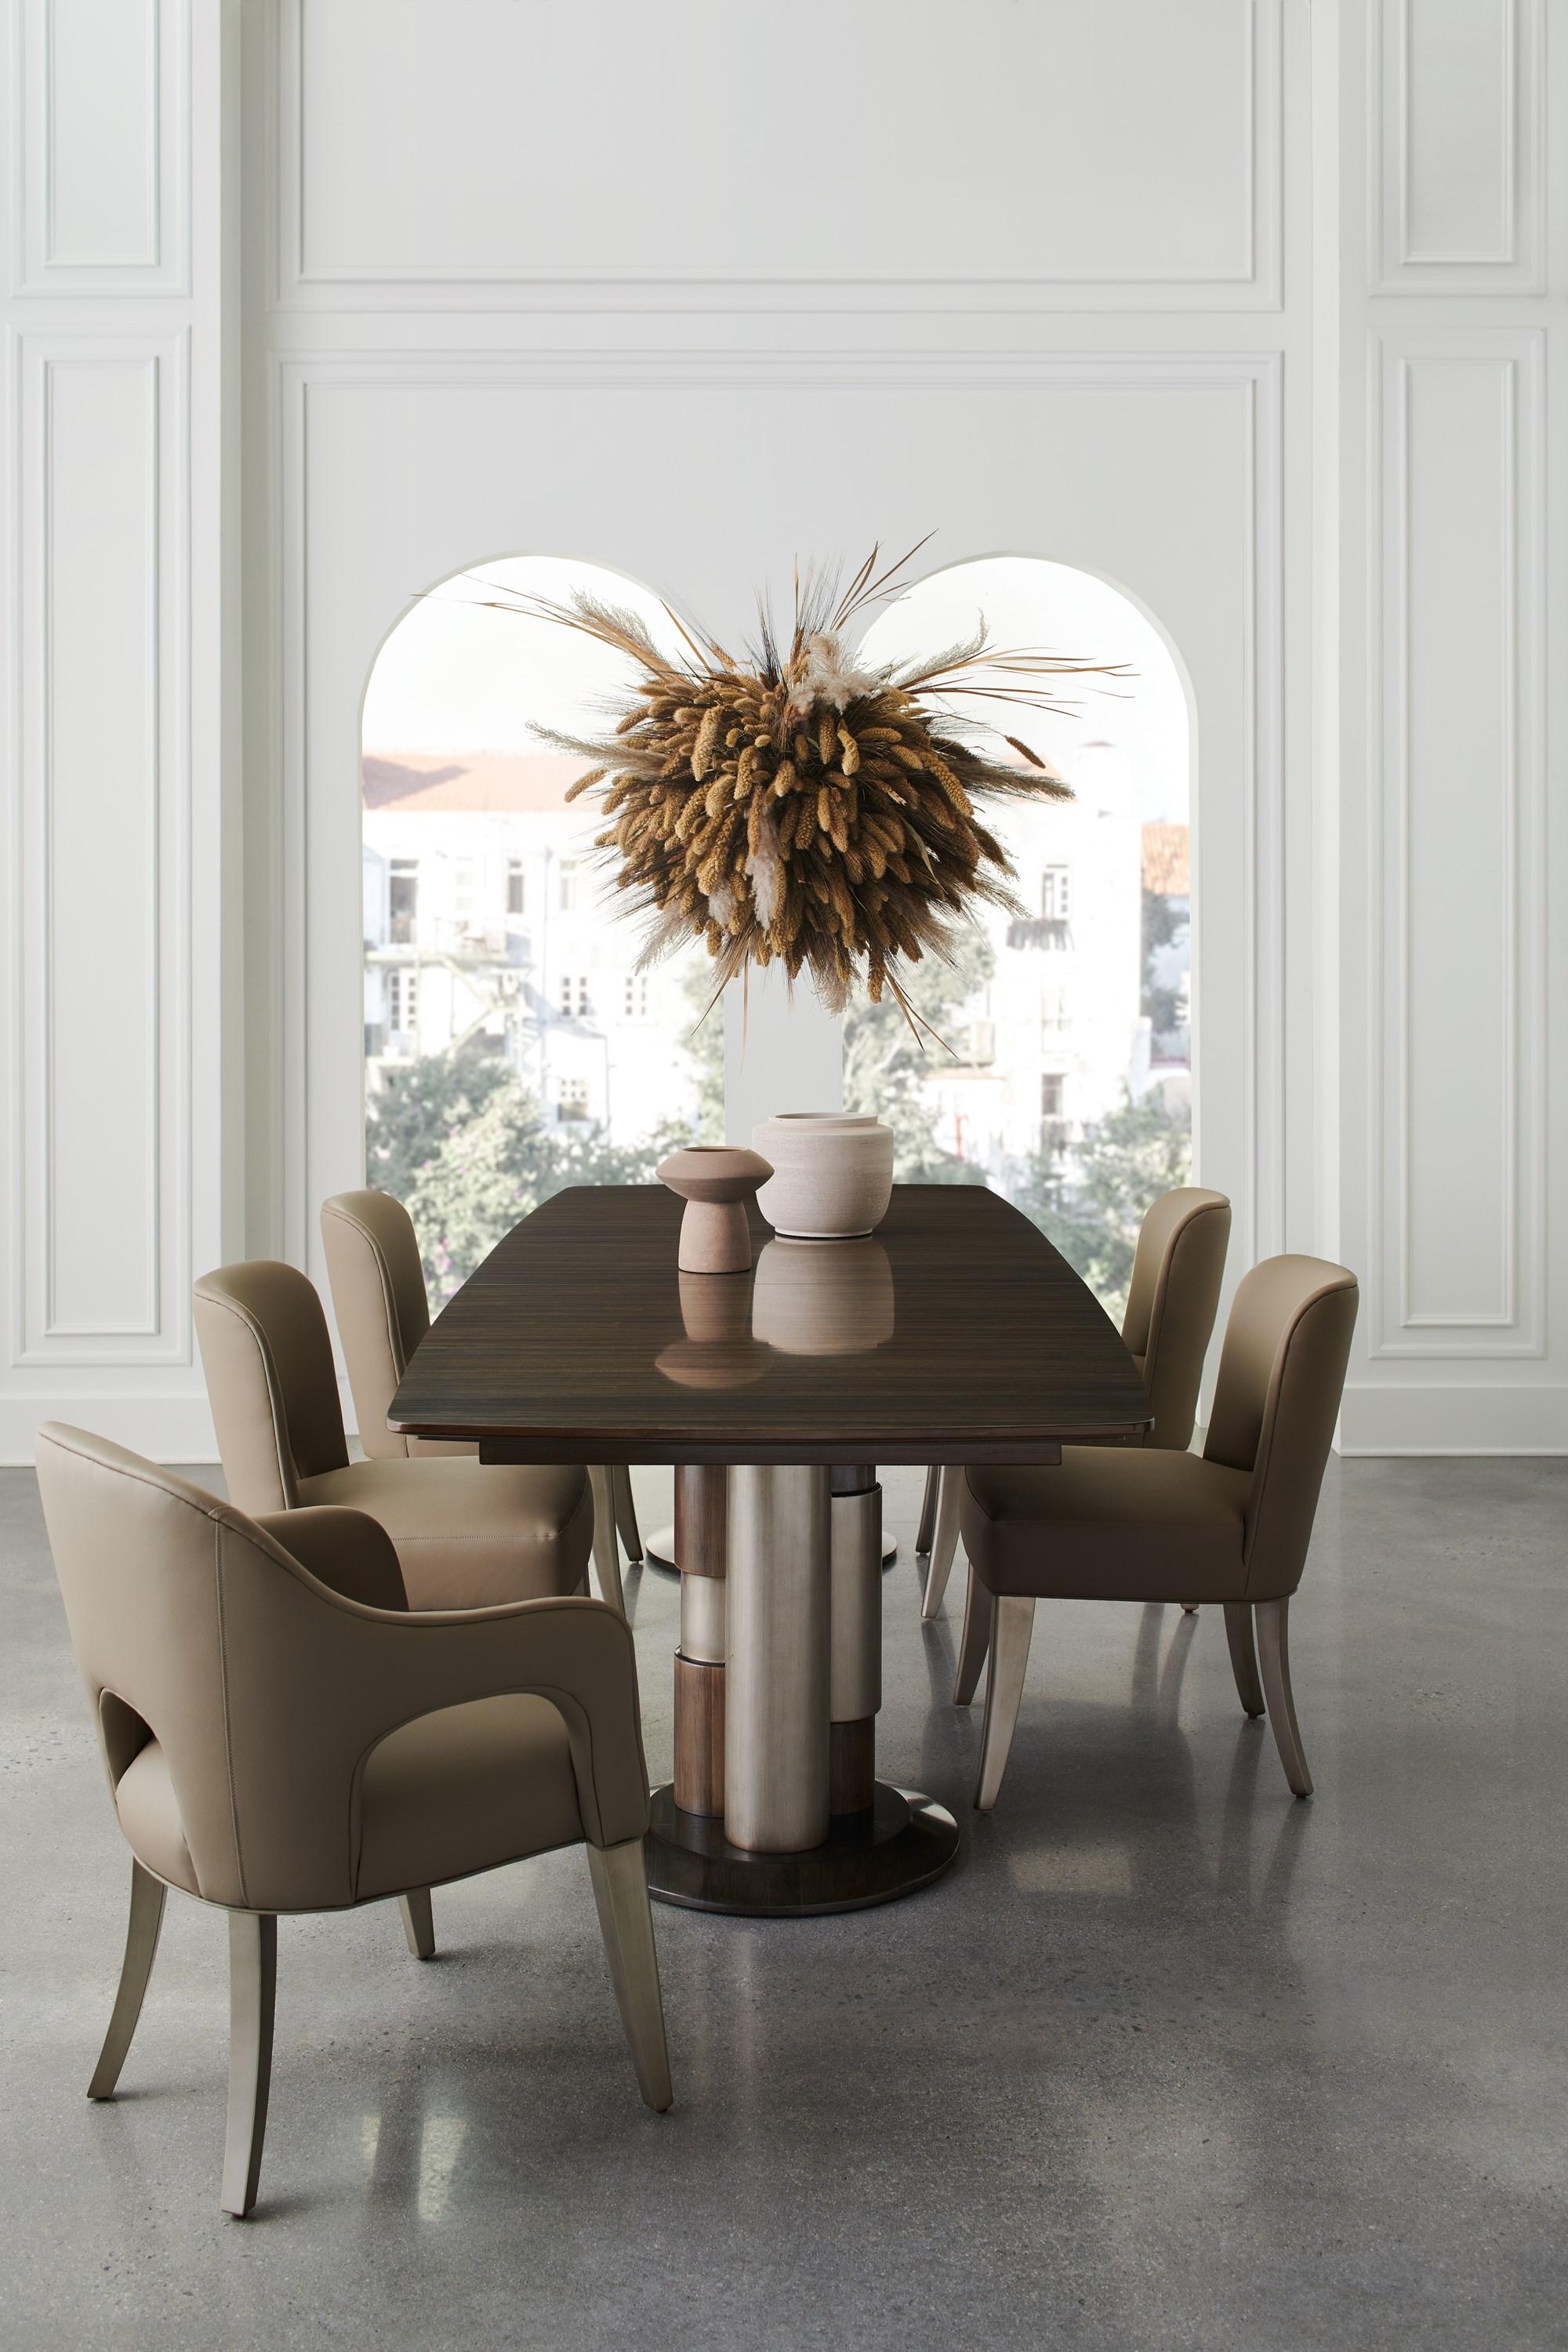 Modern Dining Table LA MODA DINING TABLE M132-421-201 in Sepia 